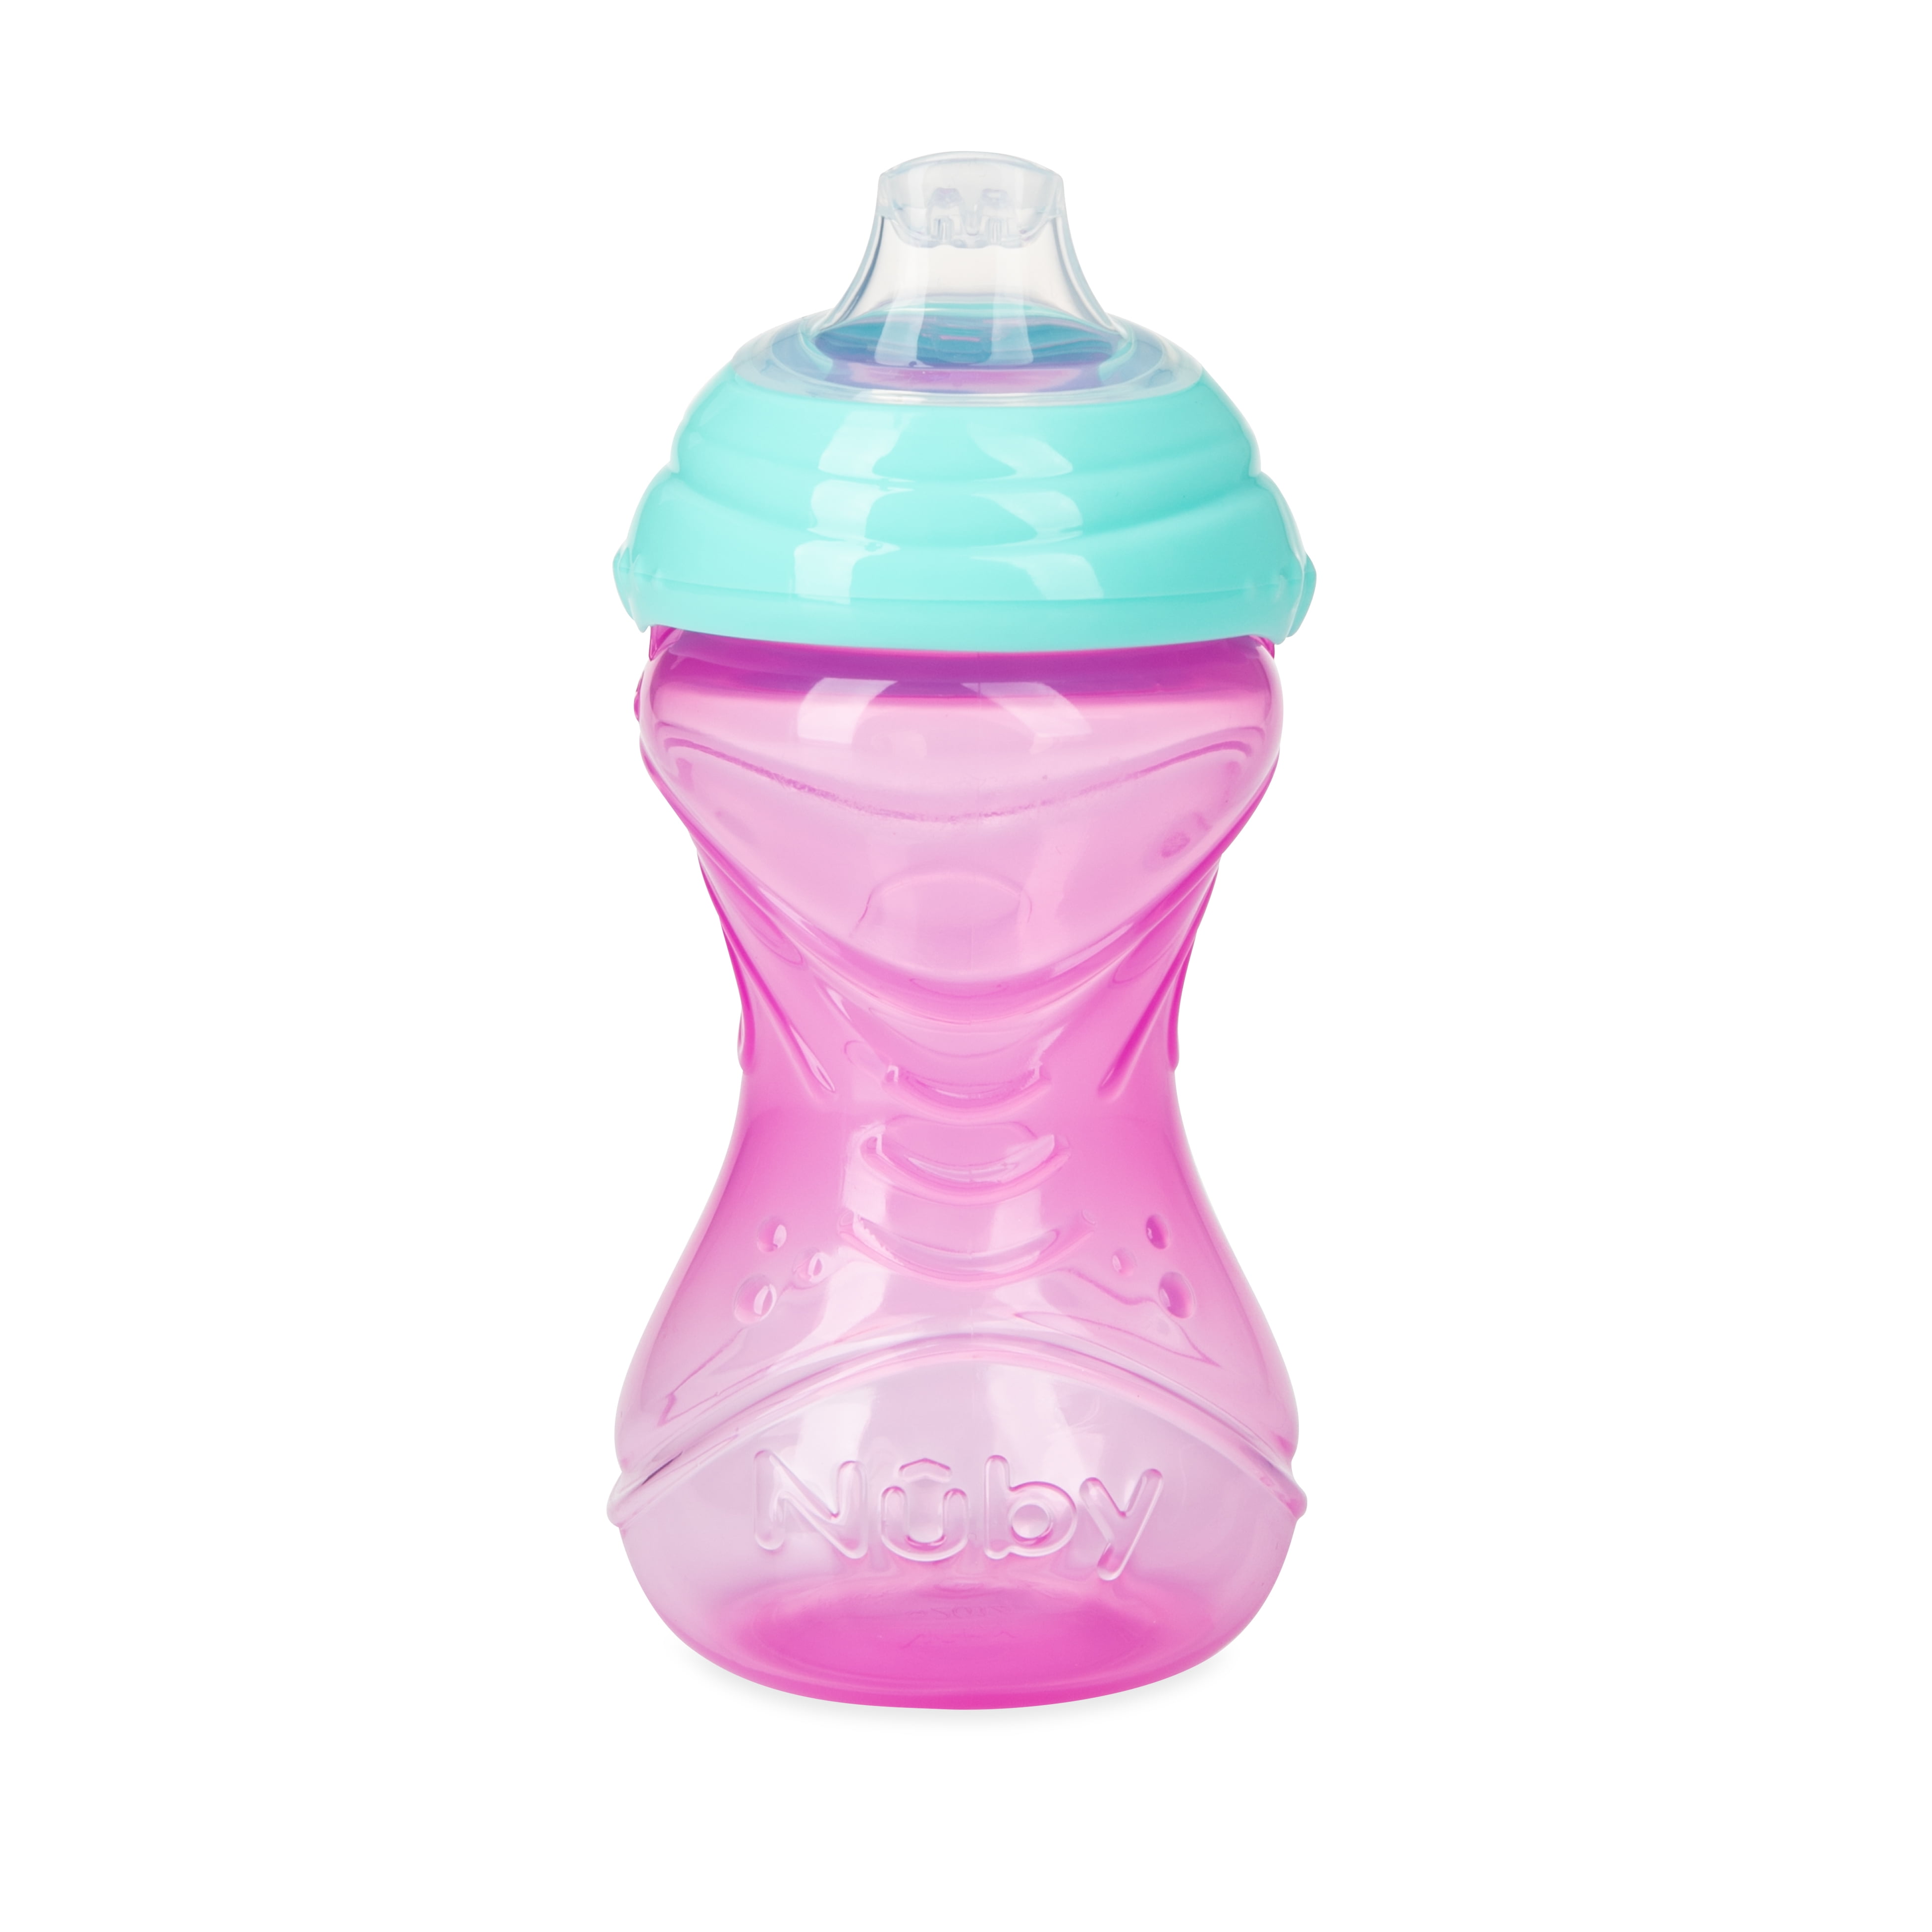 10 Ounce Nuby Clik-It Cup with Spout 2-Pack 